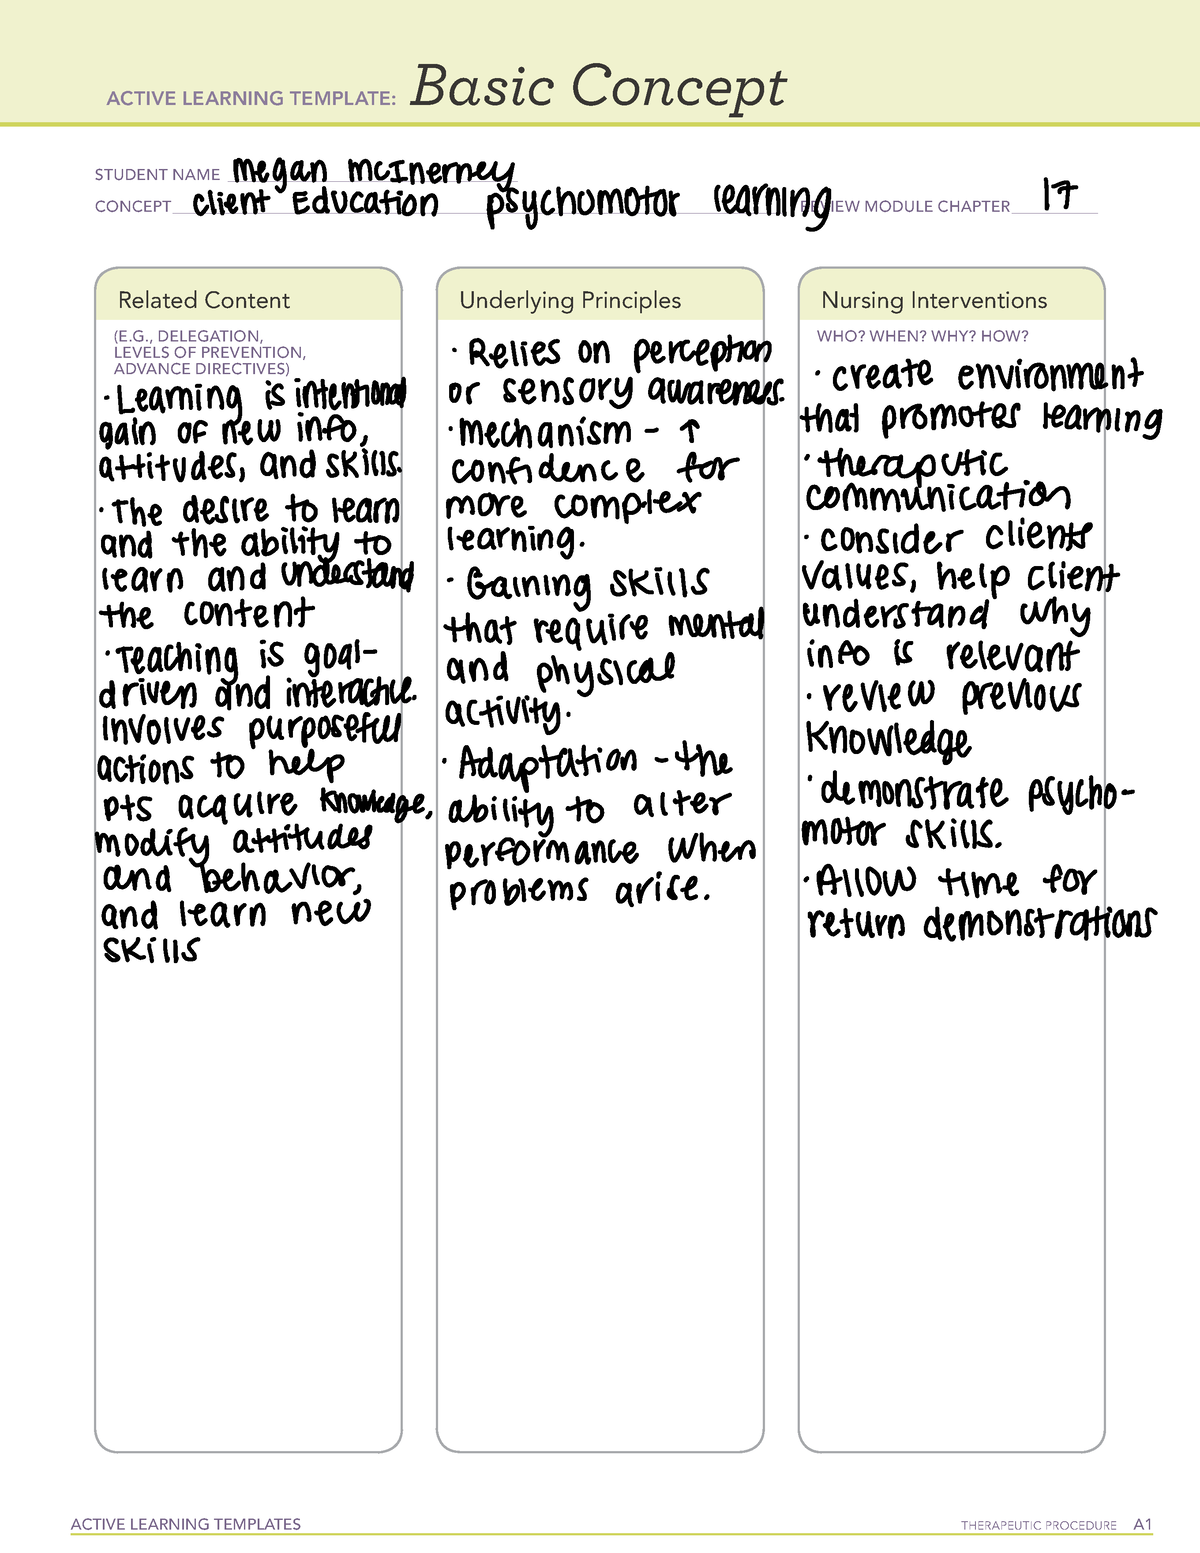 basic-concept-active-learning-template